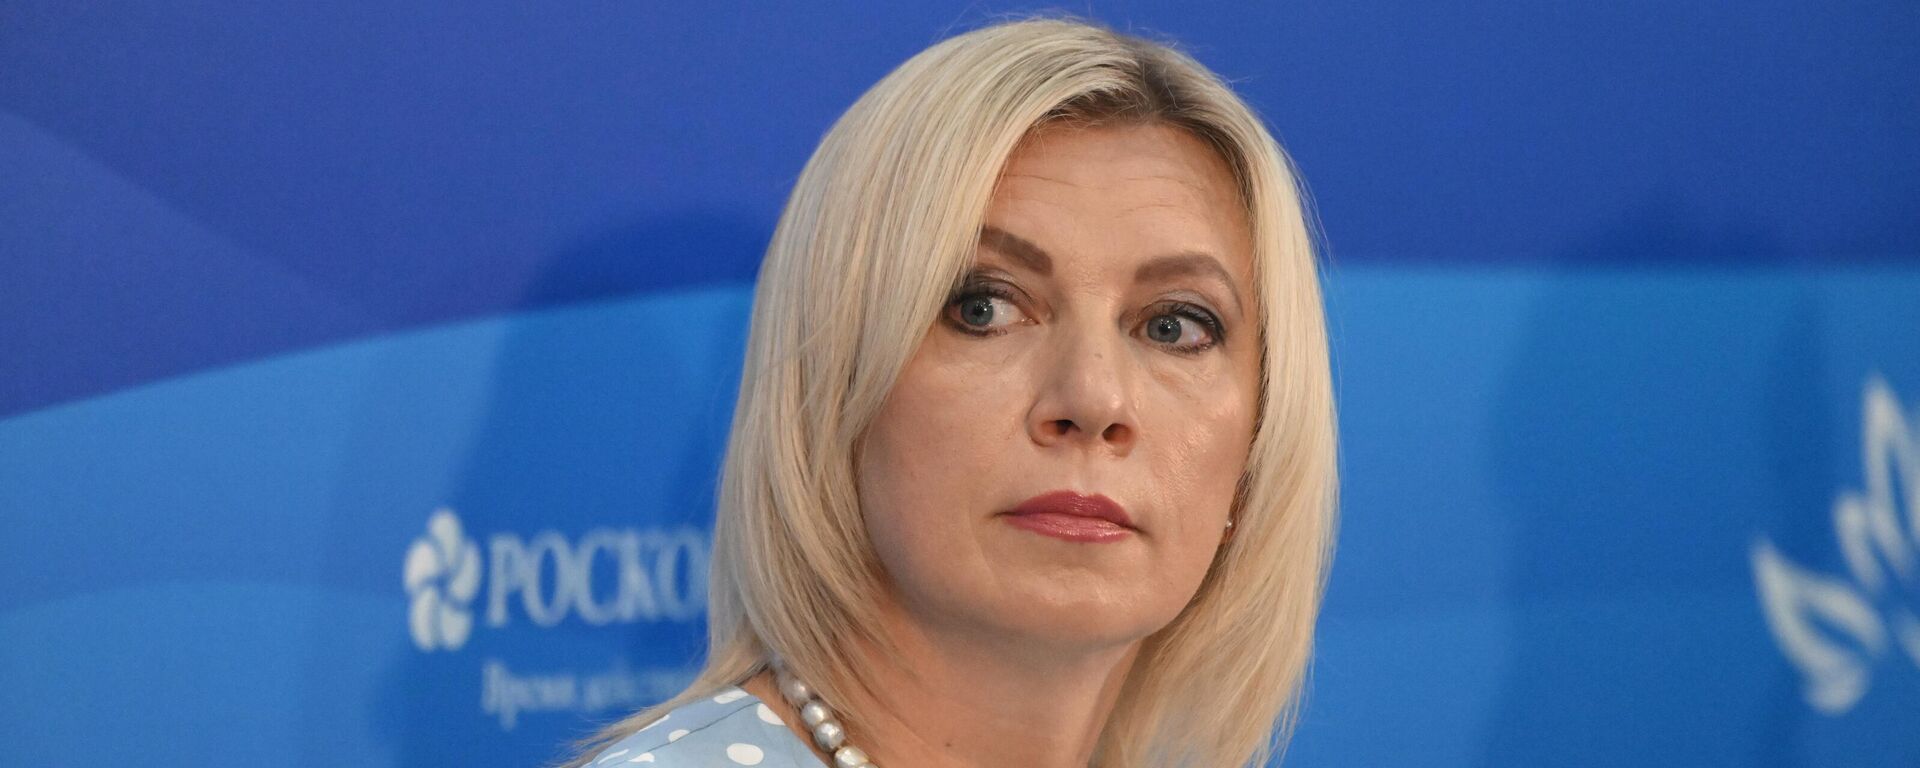 Maria Zakharova, spokeswoman for the Russian foreign ministry, at the panel discussion The Multiplicity of Truth: How to Win the Information War? at the 7th Eastern Economic Forum in Vladivostok - Sputnik International, 1920, 06.09.2022